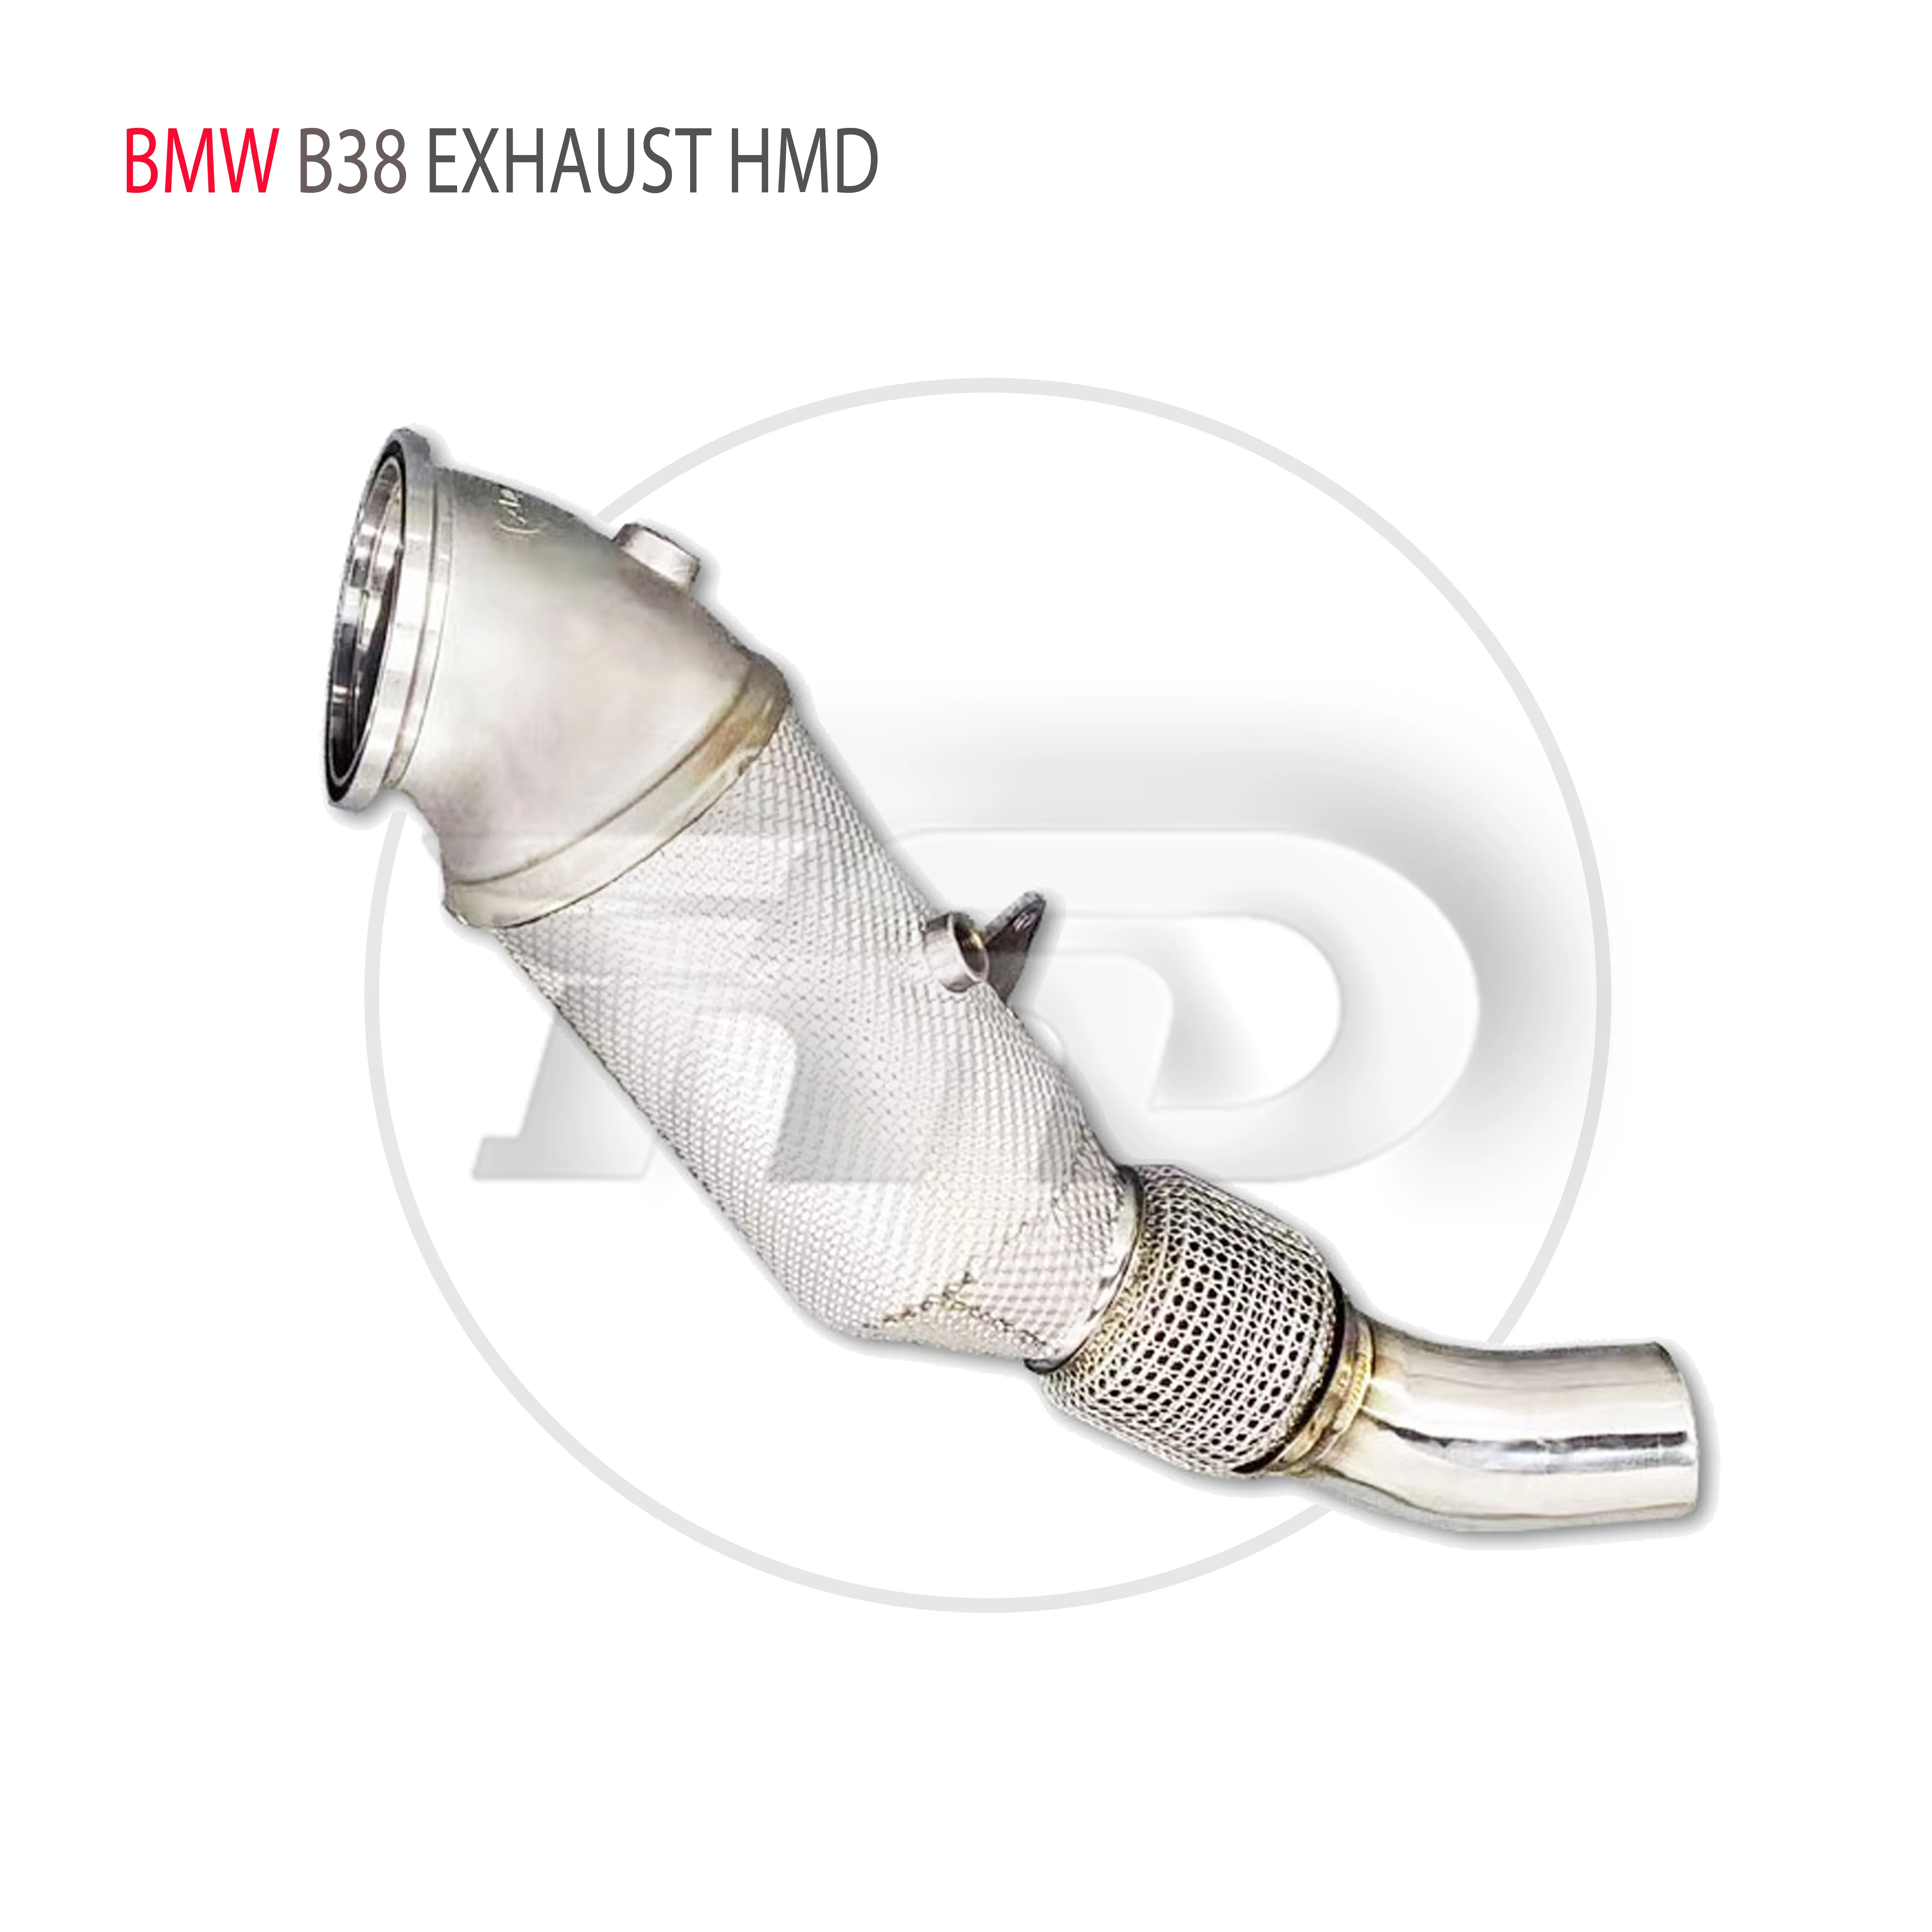 

HMD Stainless Steel Exhaust System High Flow Performance Downpipe for BMW X2 20i F39 B38 1.5T Car Accessories